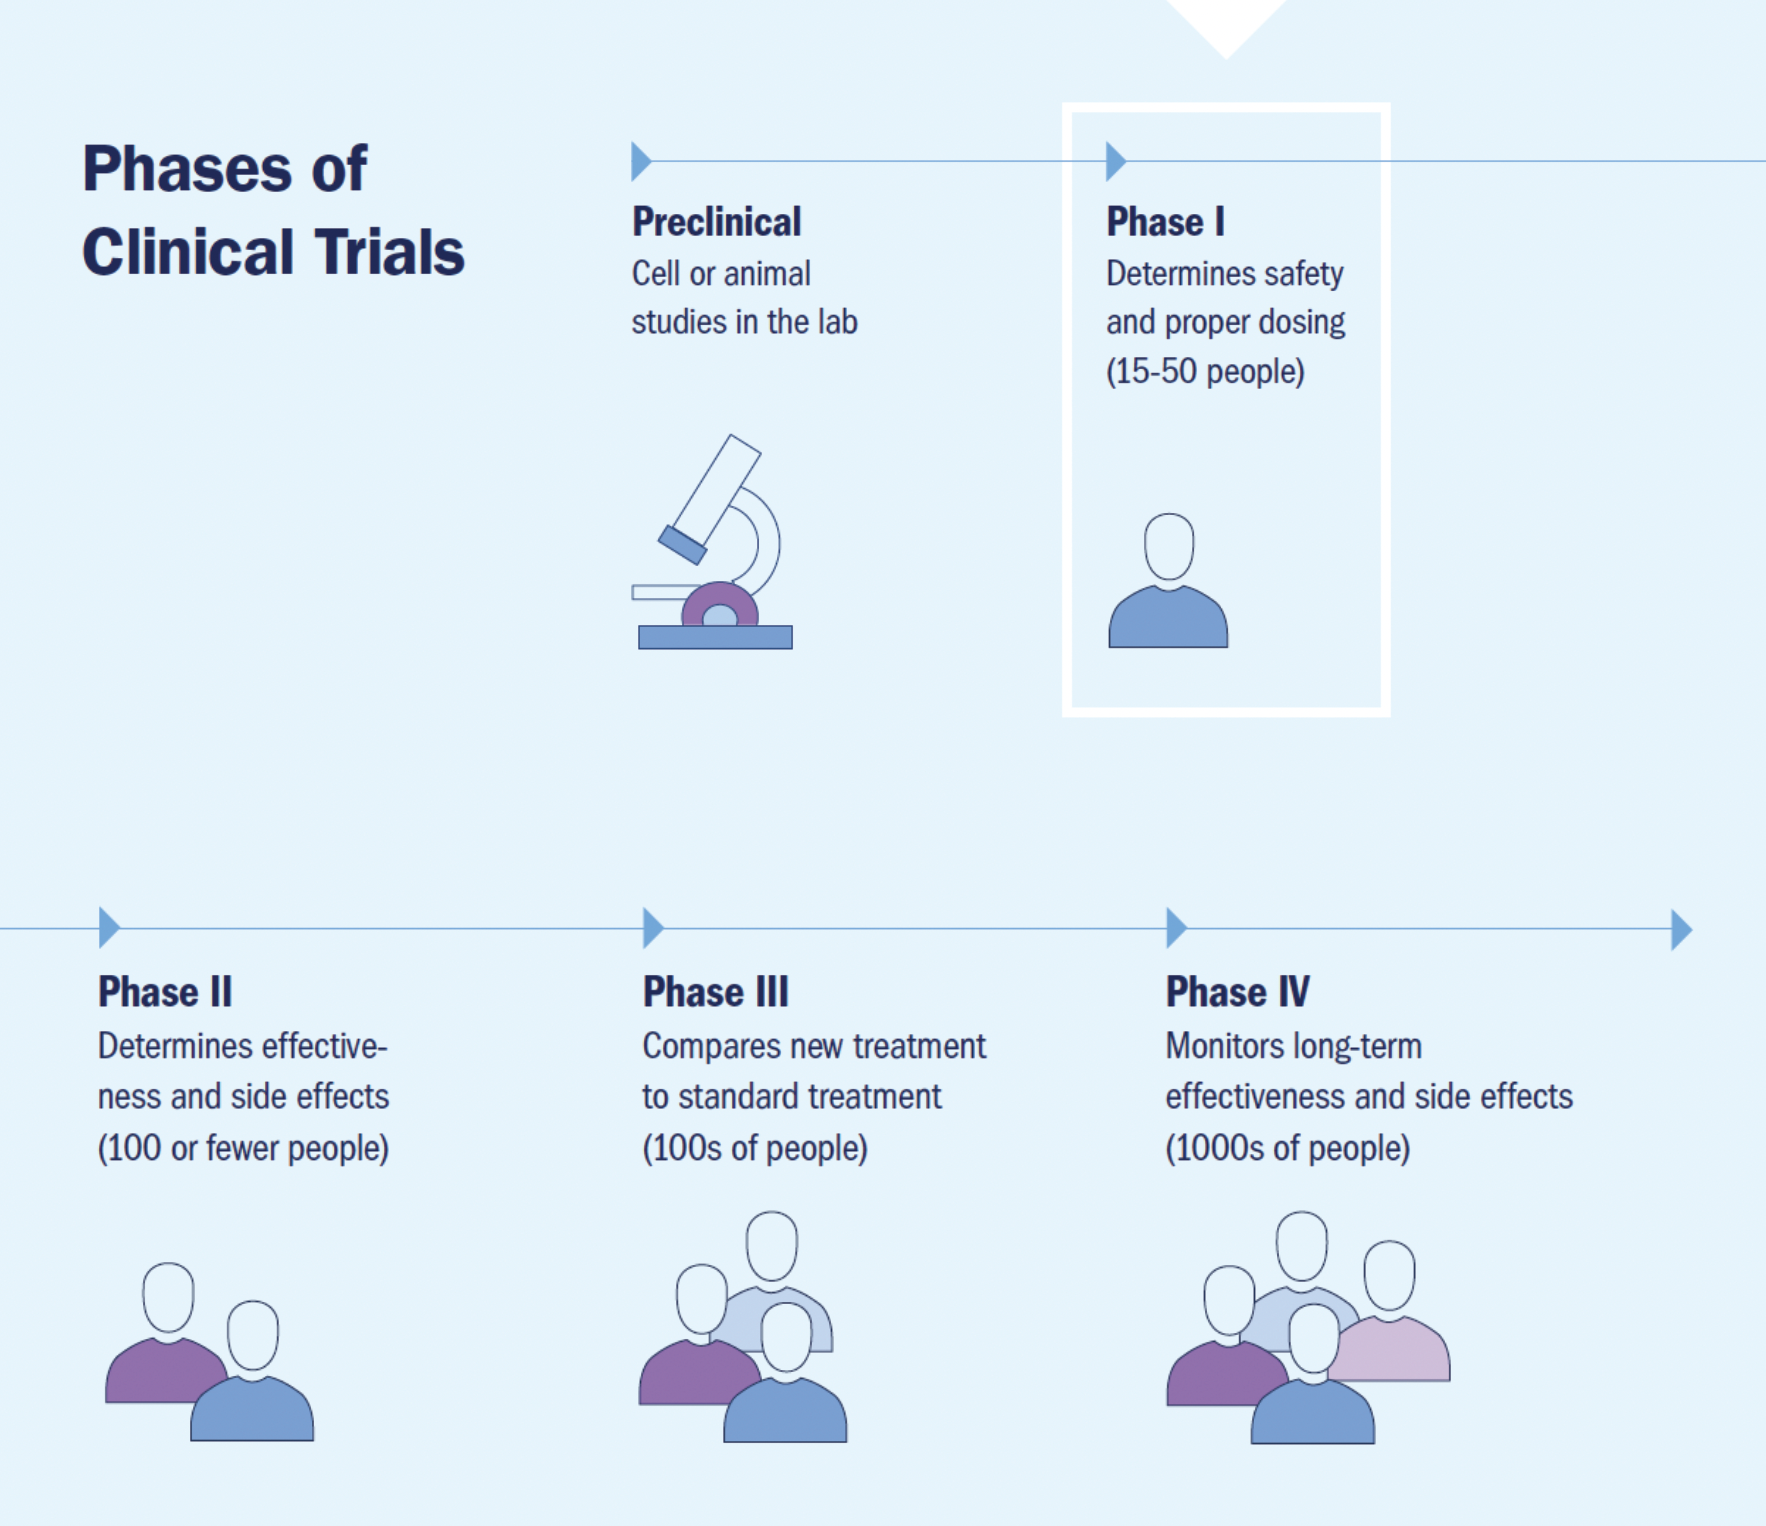 infographic summarizing the phases of clinical trials